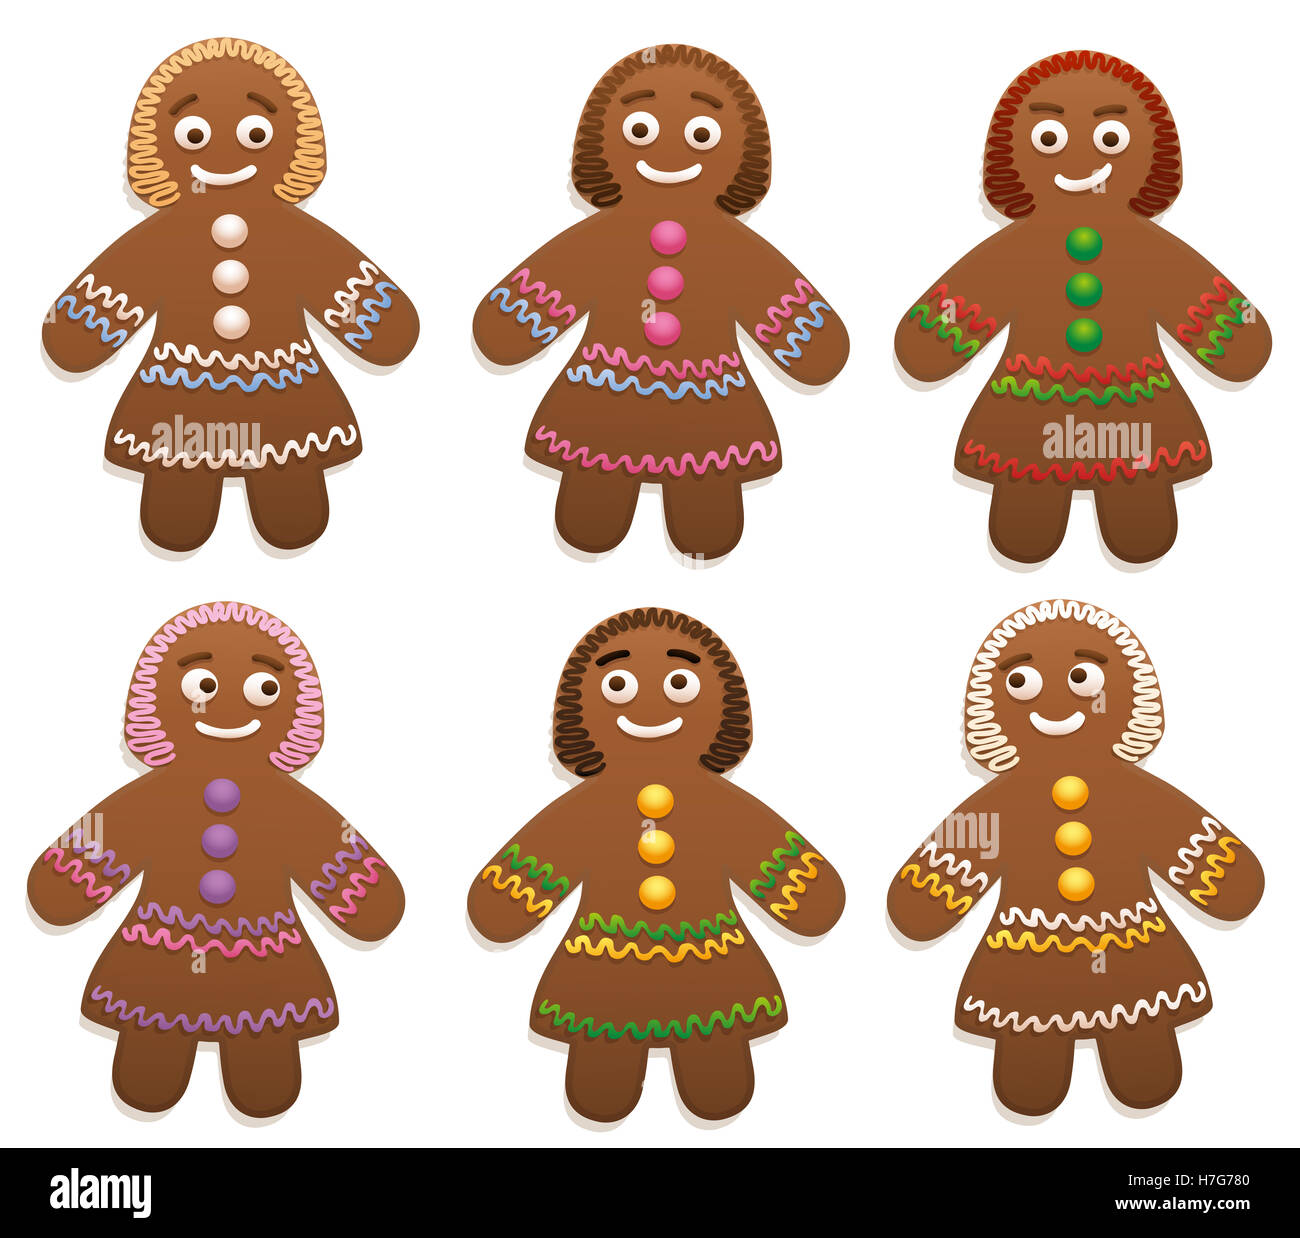 Female gingerbread man group - isolated vector illustration on white background. Stock Photo